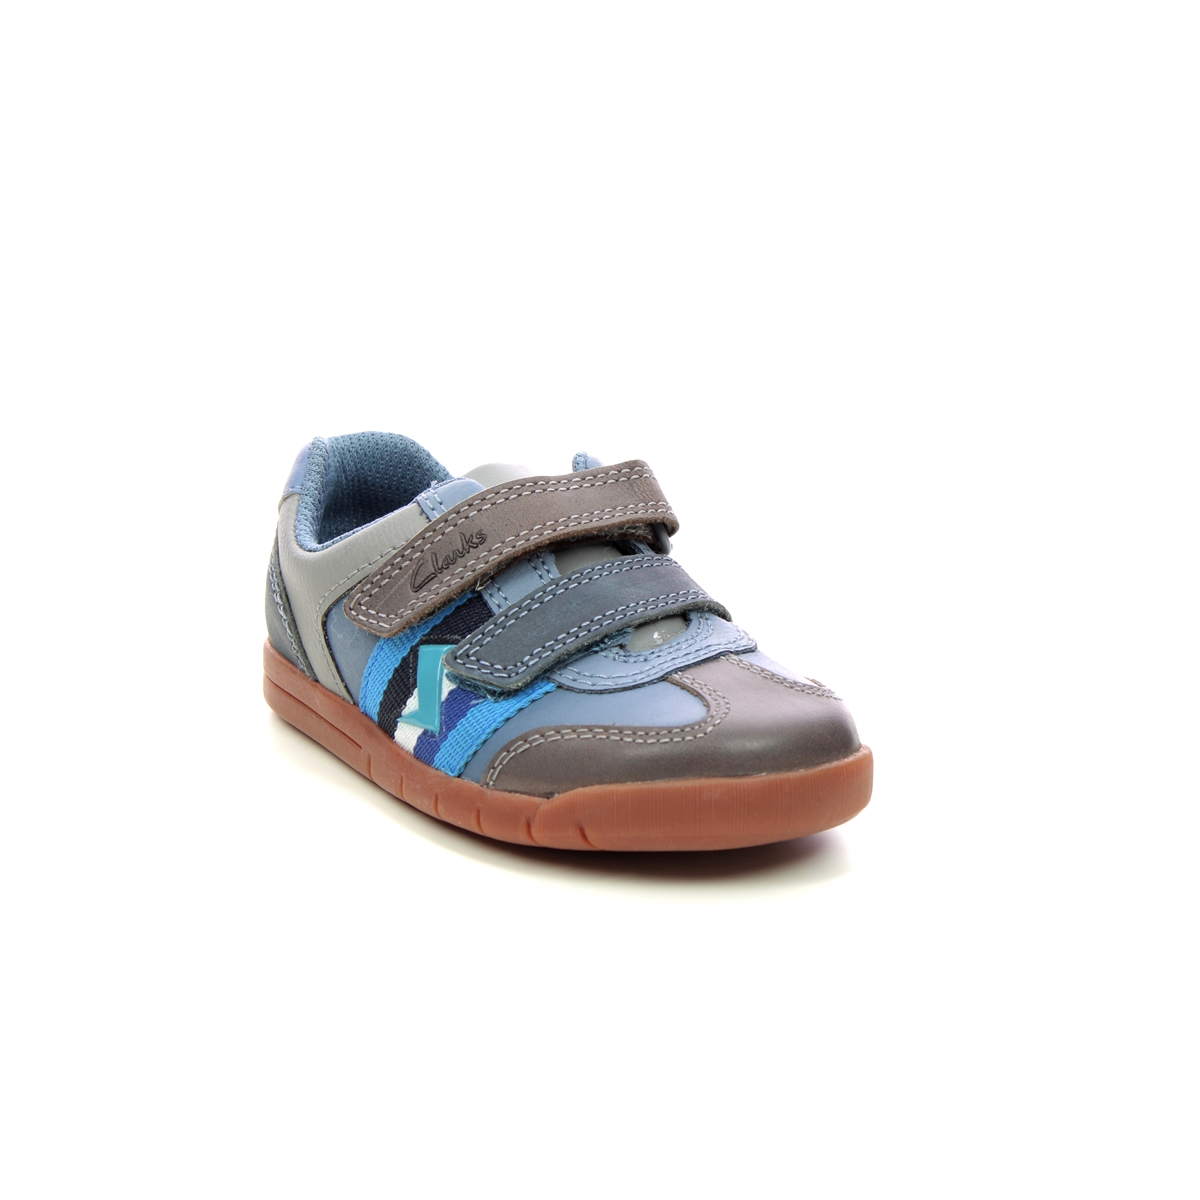 Clarks Den Stripe T Blue Grey Kids Boys Toddler Shoes 7011-26F in a Plain Leather in Size 6.5